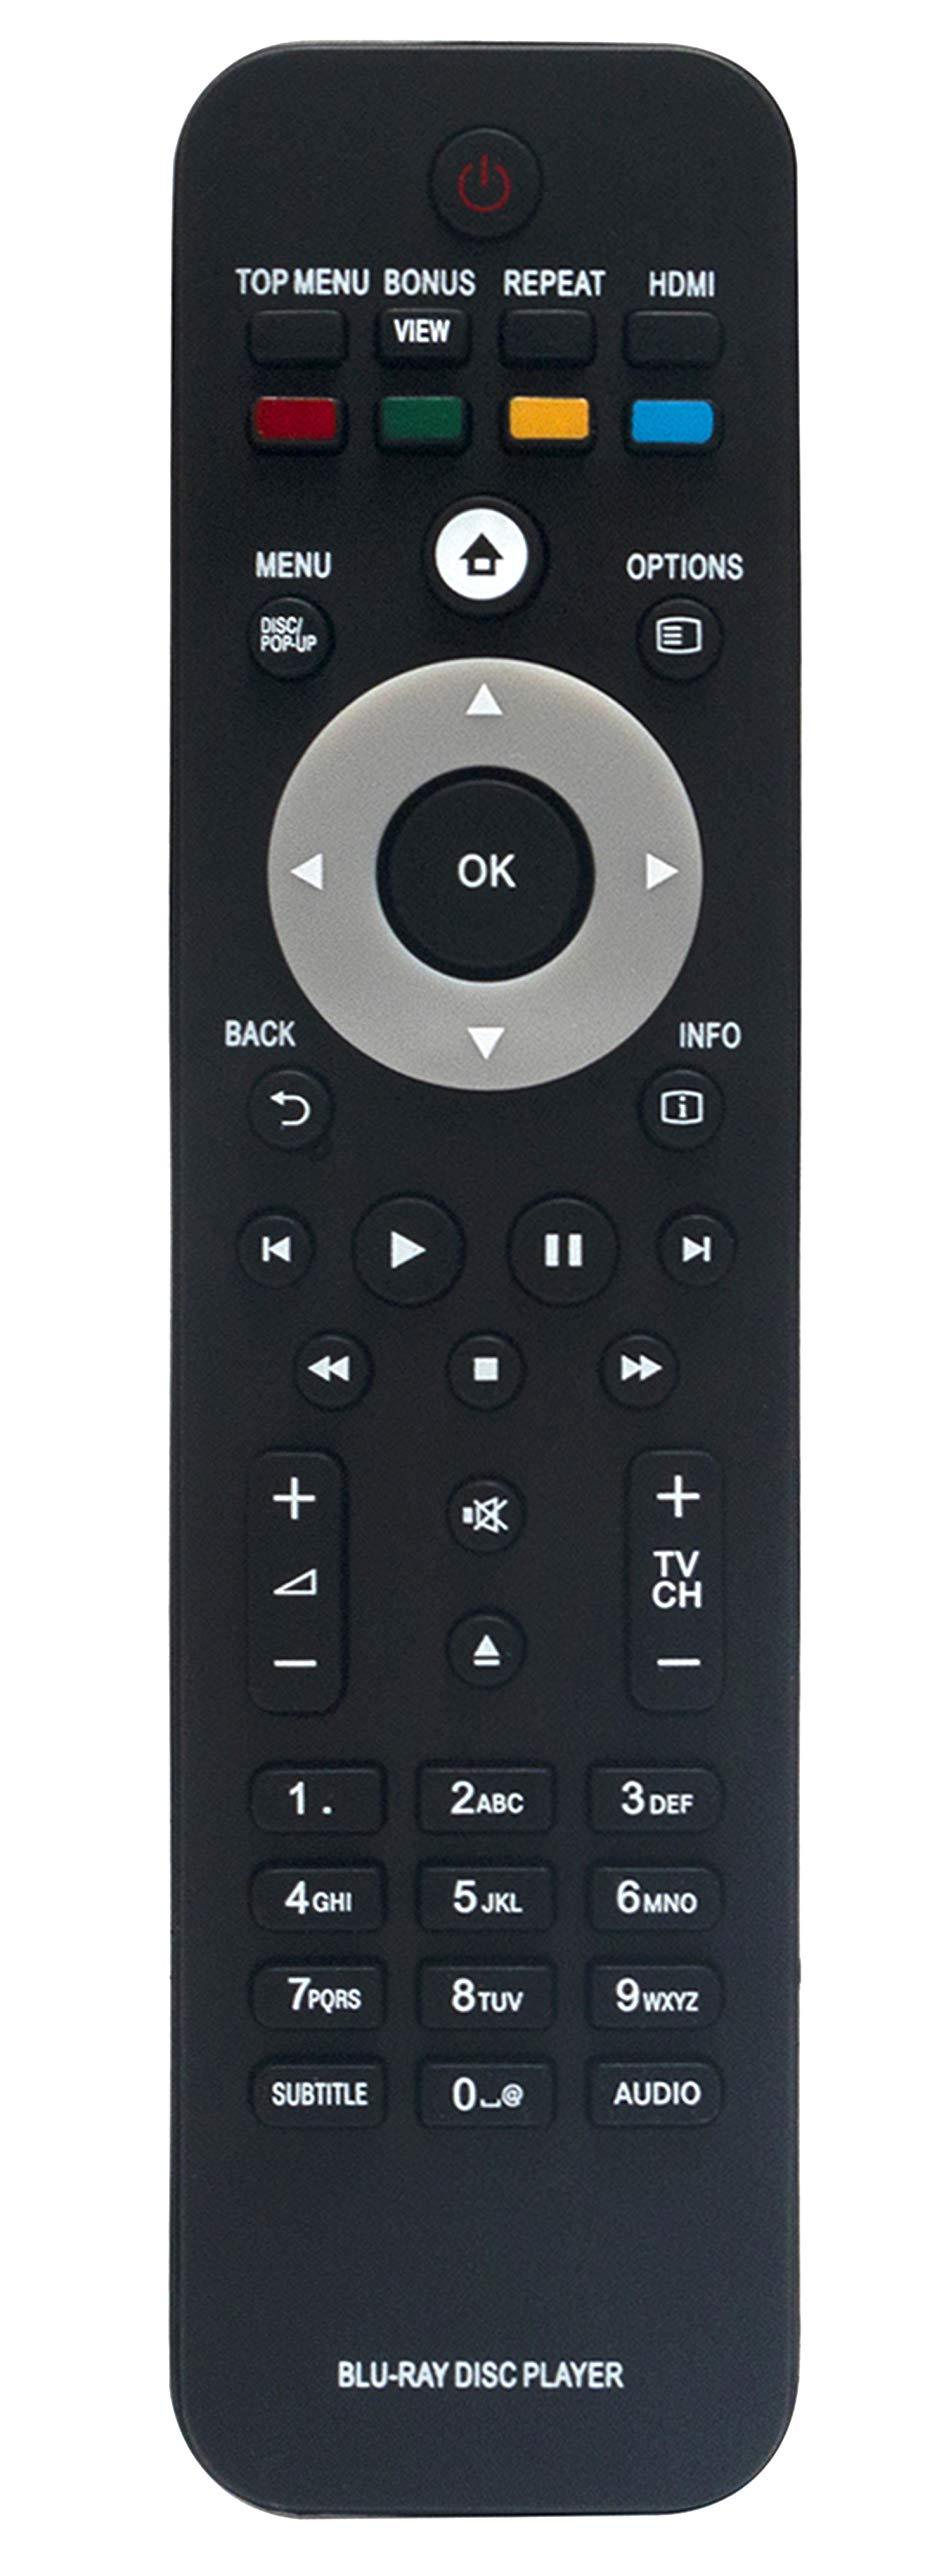 VINABTY Replaced Remote fit for Philips BLU-RAY Disc Player BDP3000 BDP2500 BDP3000 BDP2500 NB545 NB545UD BDP3010 BDPP3020 P5005 /F7 BDP3406/F7 BDP5406/F7 BDP2600 BDP2600/93/98 BDP2610 BDP2688 - LeoForward Australia